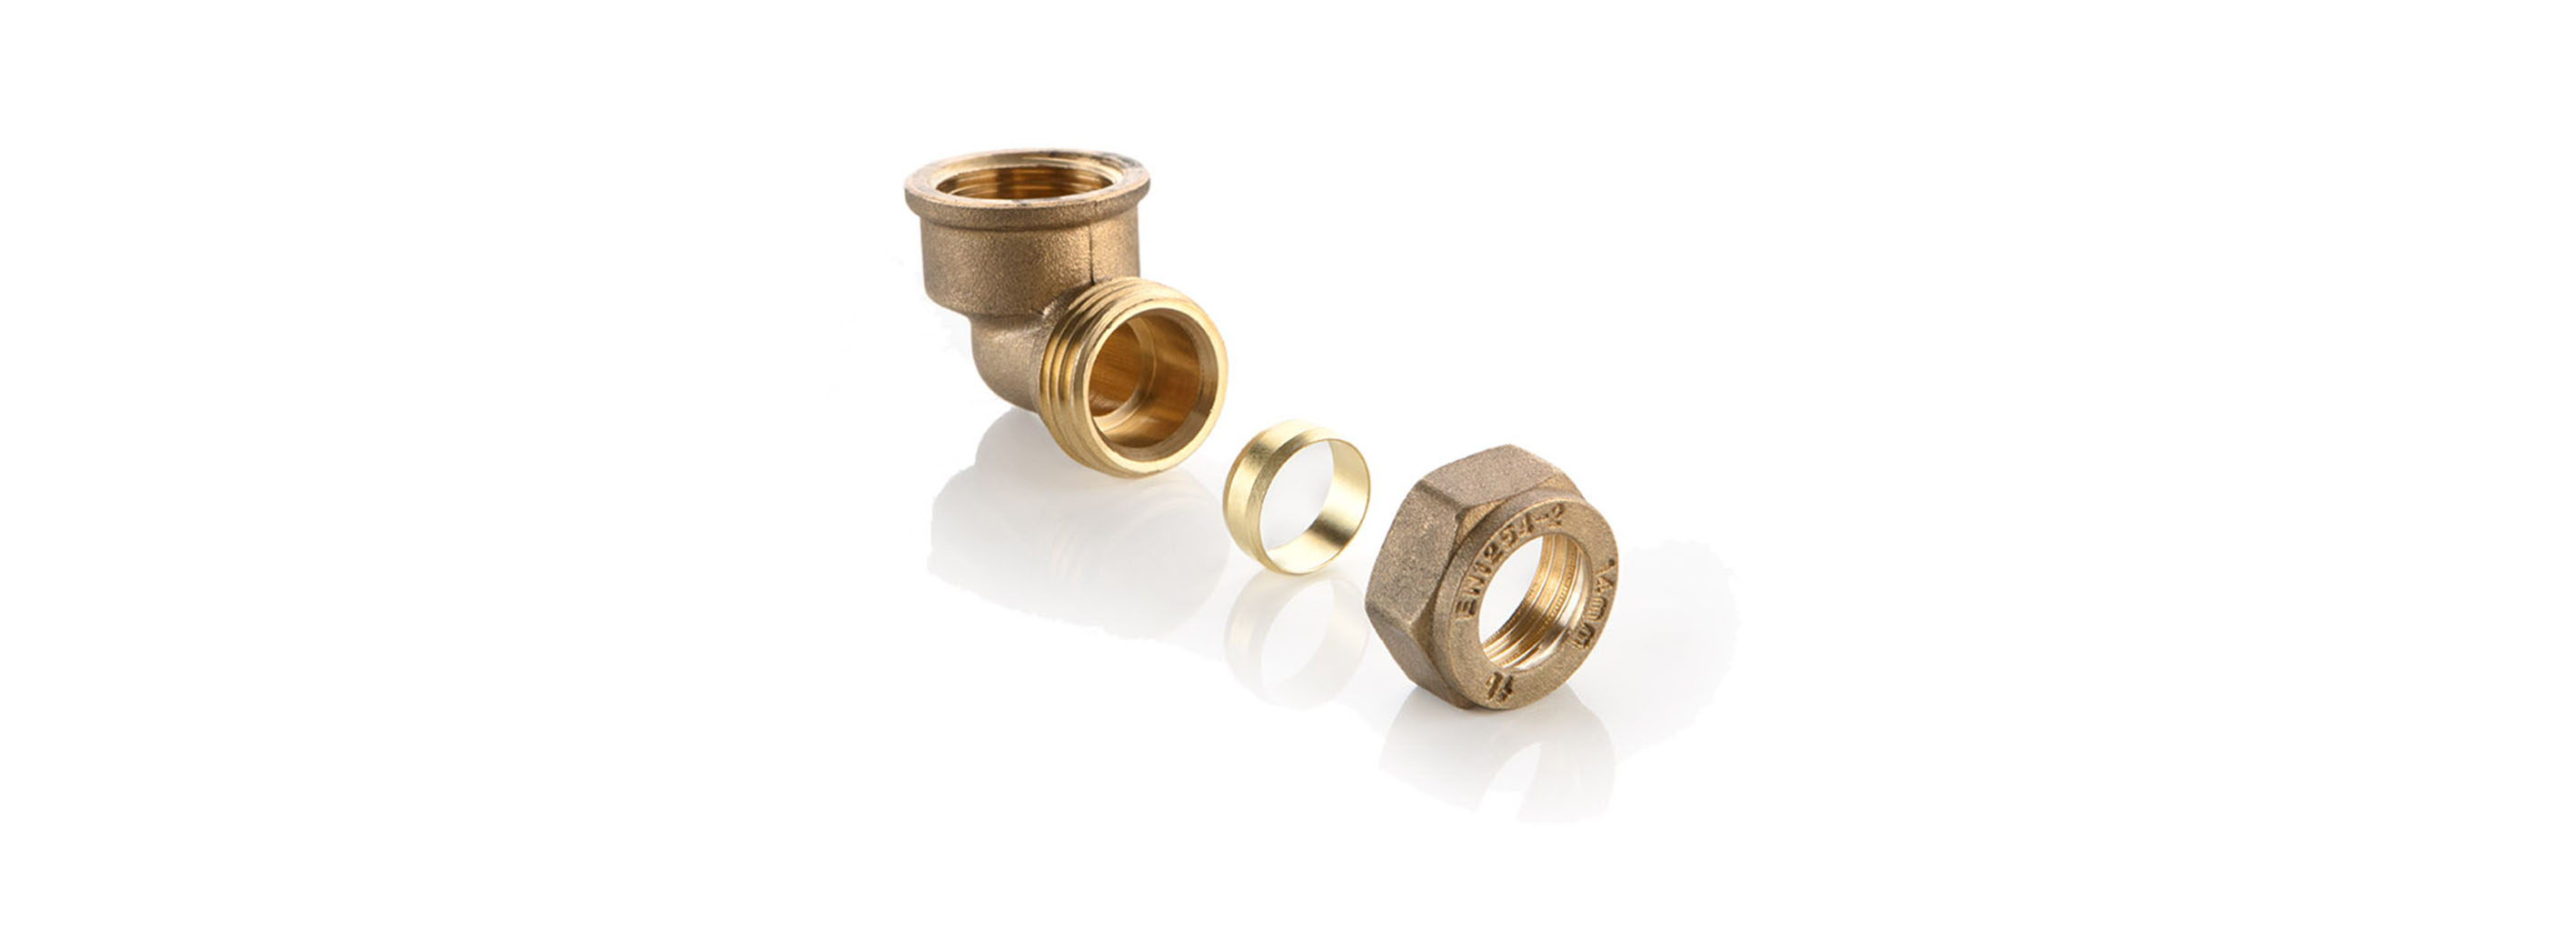 Serie 6000OT: brass compression fittings for industrial automation